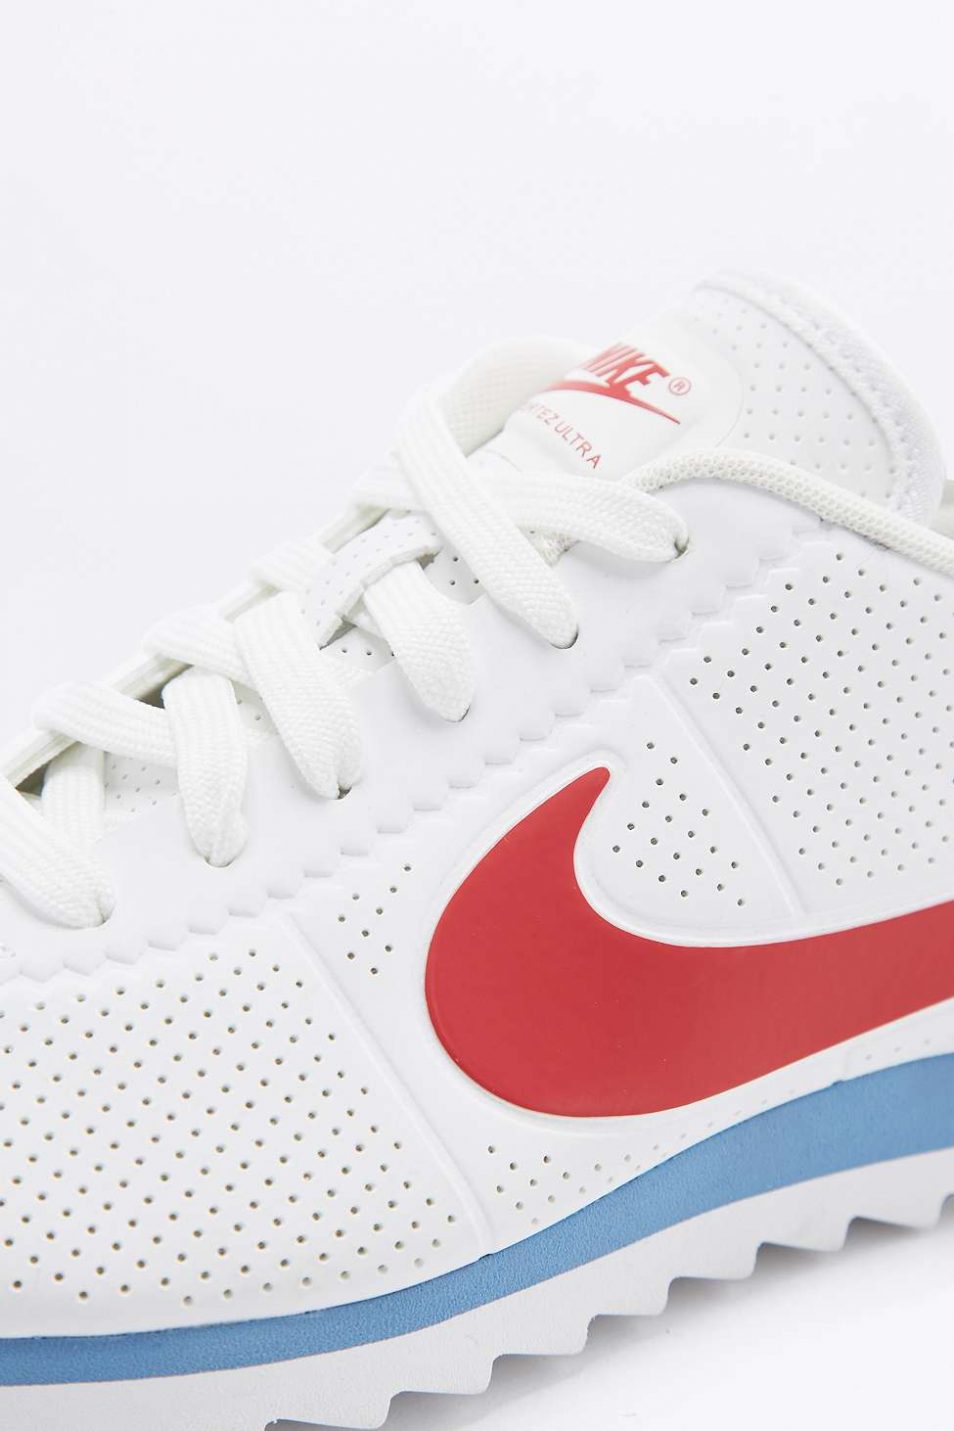 Nike Cortez Ultra Moire Red White and Blue Trainers 4